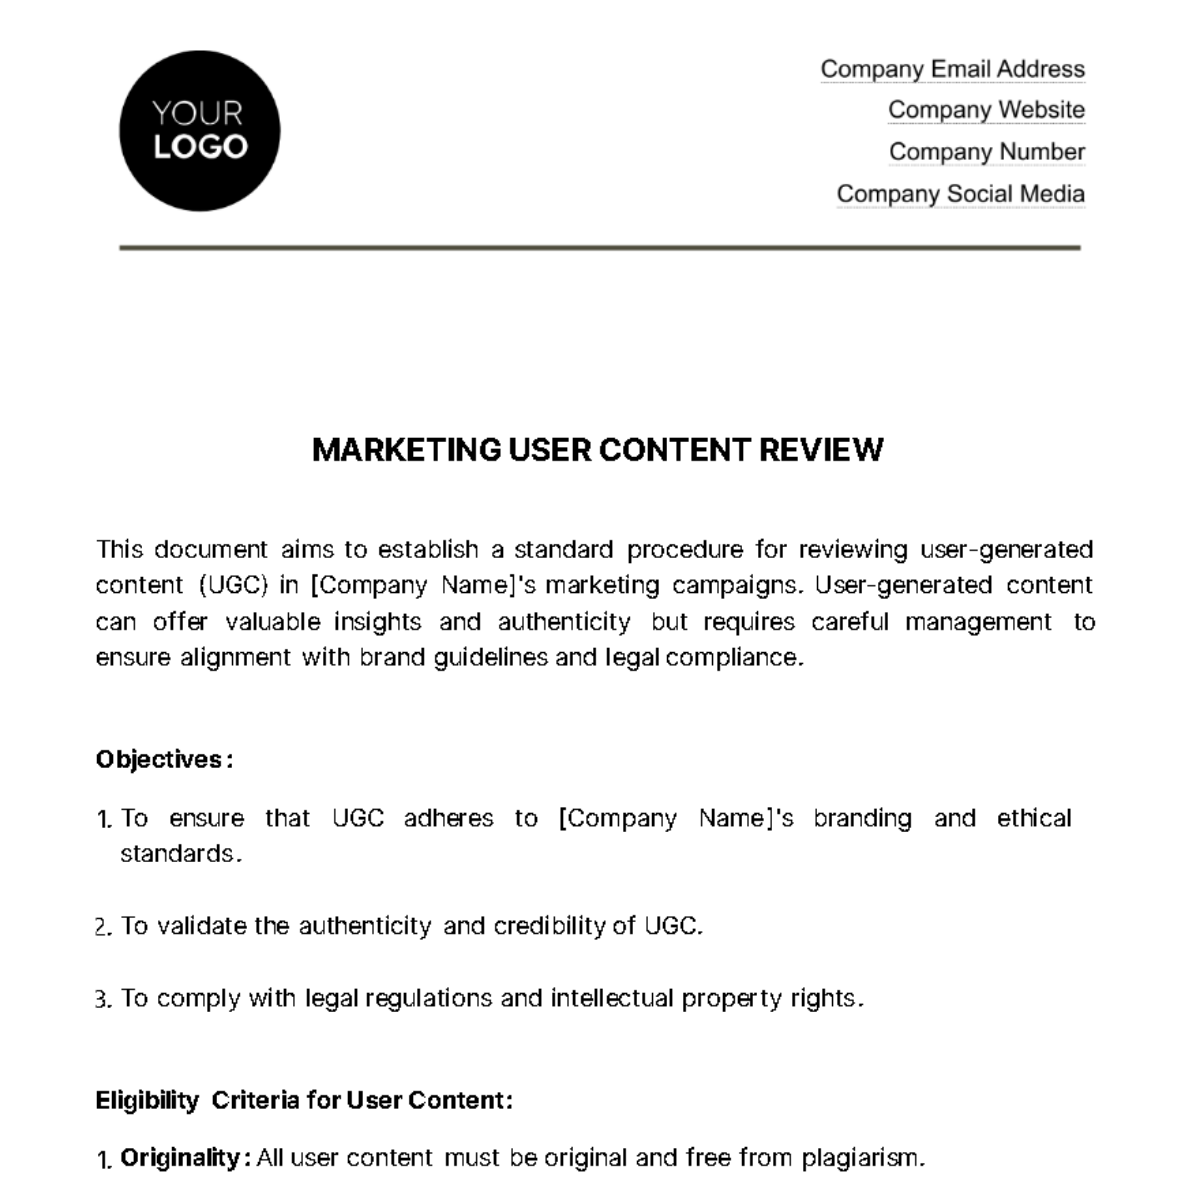 Marketing User Content Review Template